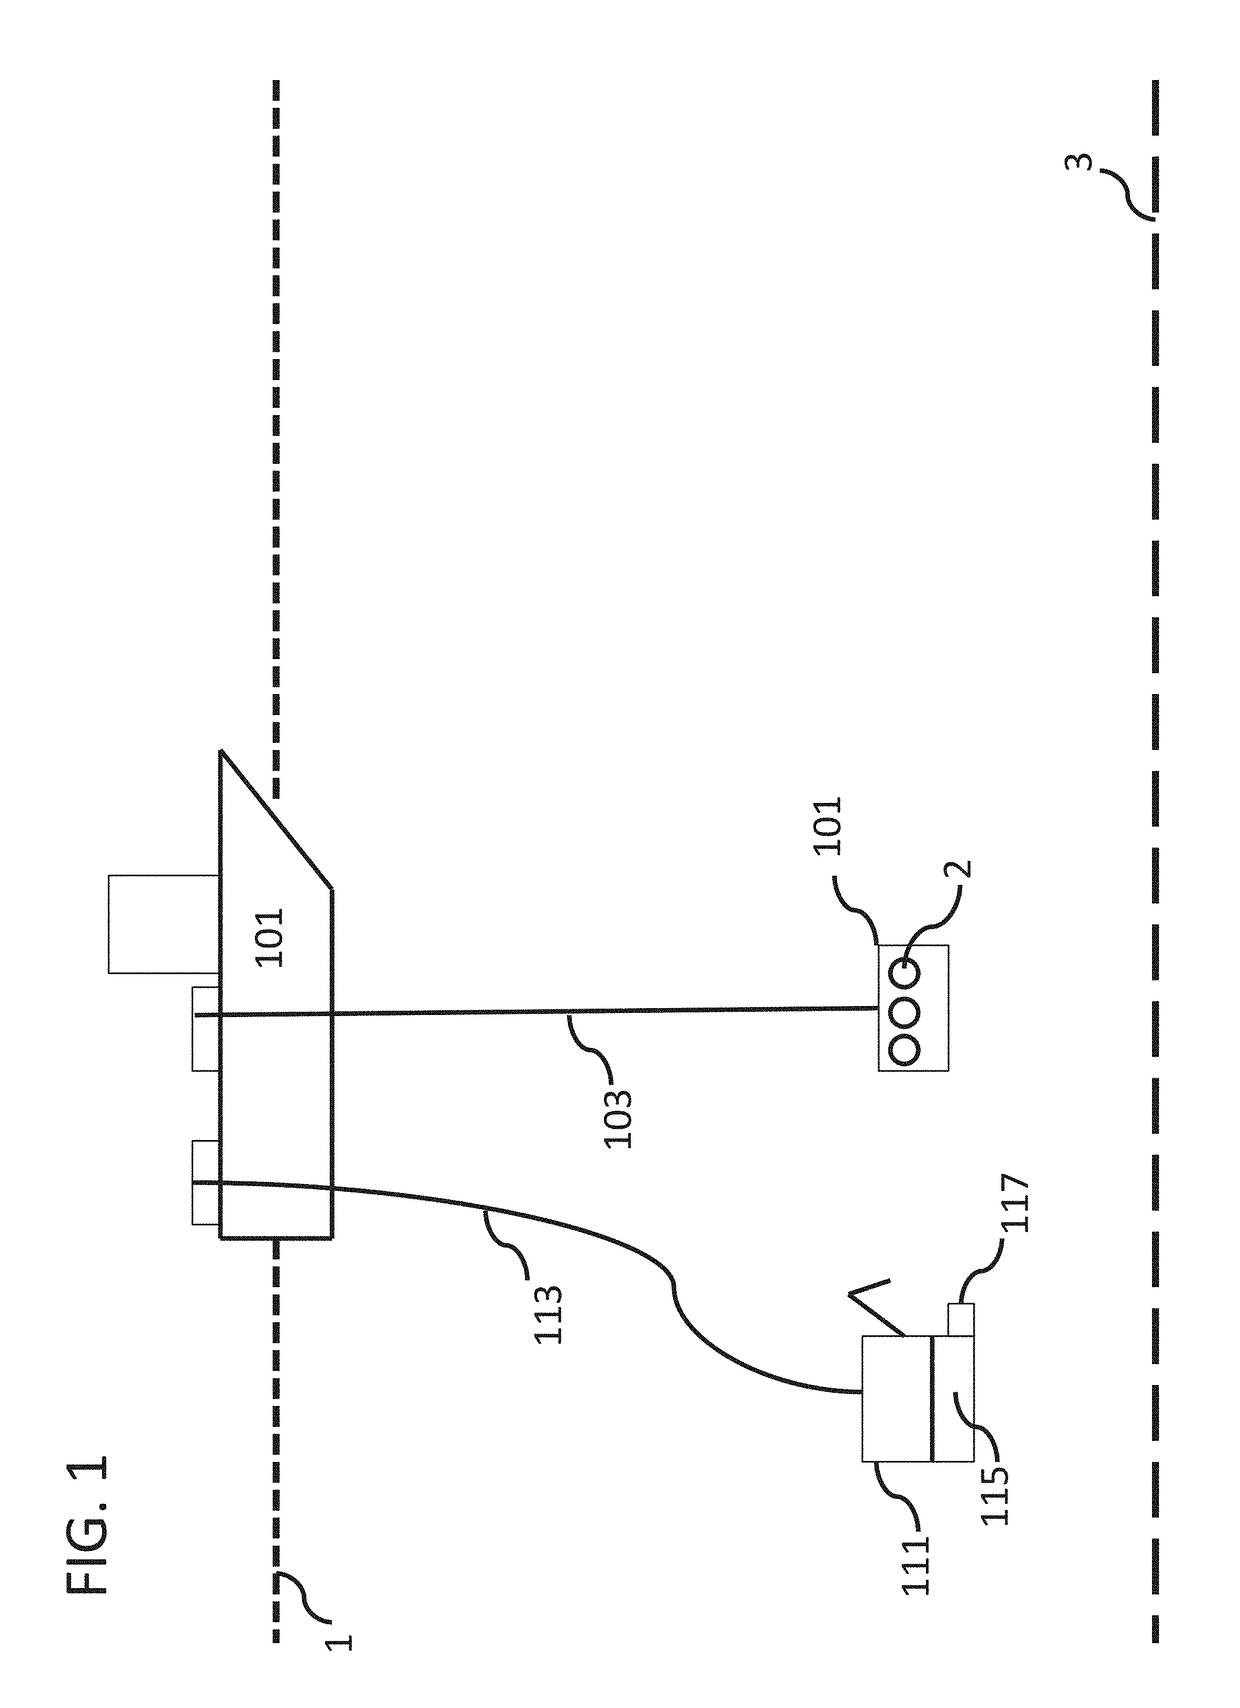 Elevator system on a subsea device for transfer of subsea payload